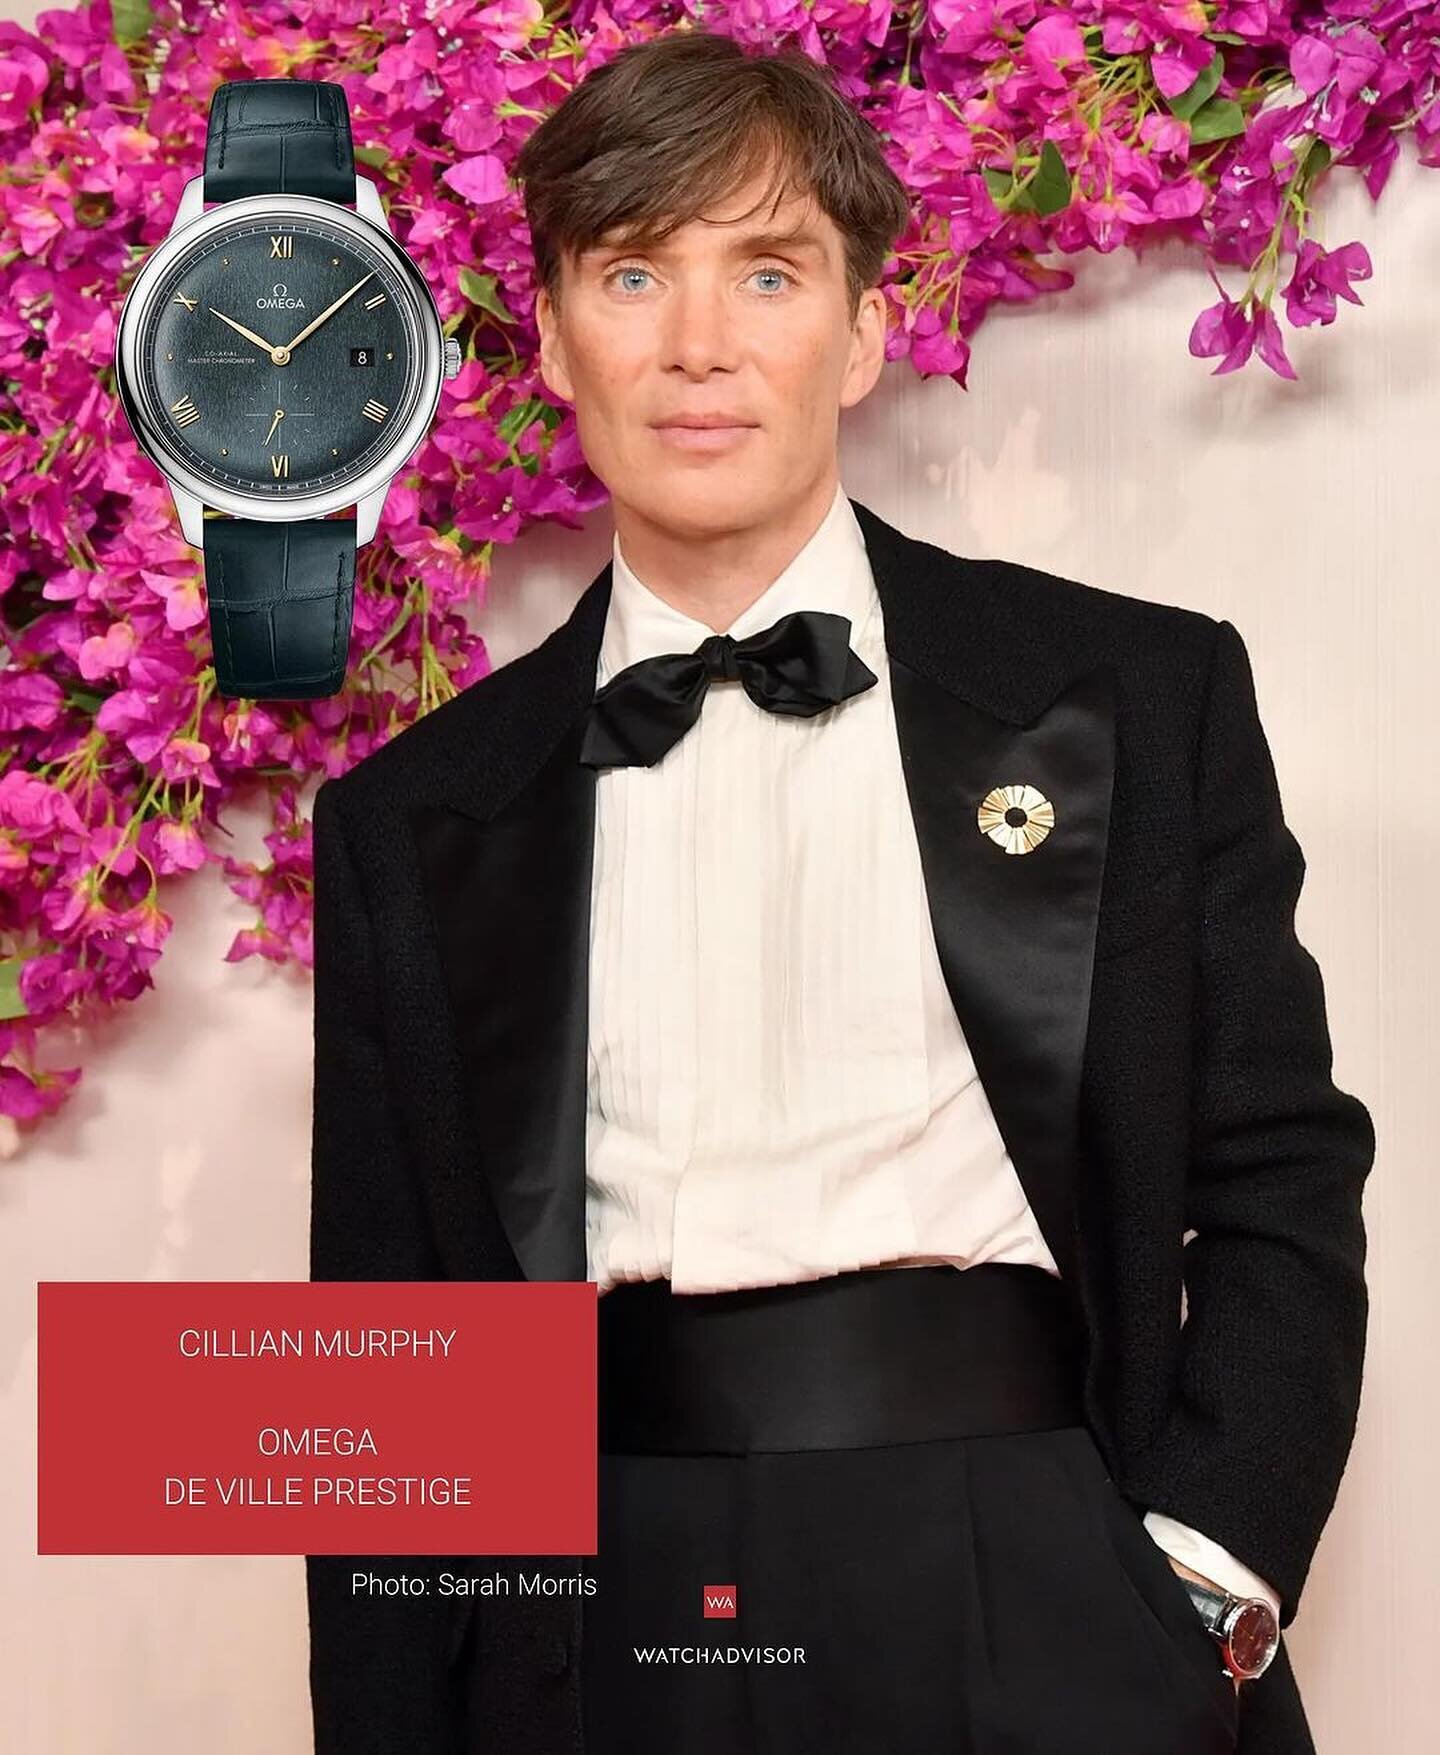 @watchadvisor Exclusive Review of the Watches Worn at the 96th Academy Awards! ✨

Captivating audiences worldwide, the Oscars dazzled with more than just red carpet glamour. Explore the stunning watches adorning celebrities&rsquo; wrists at the Oscar